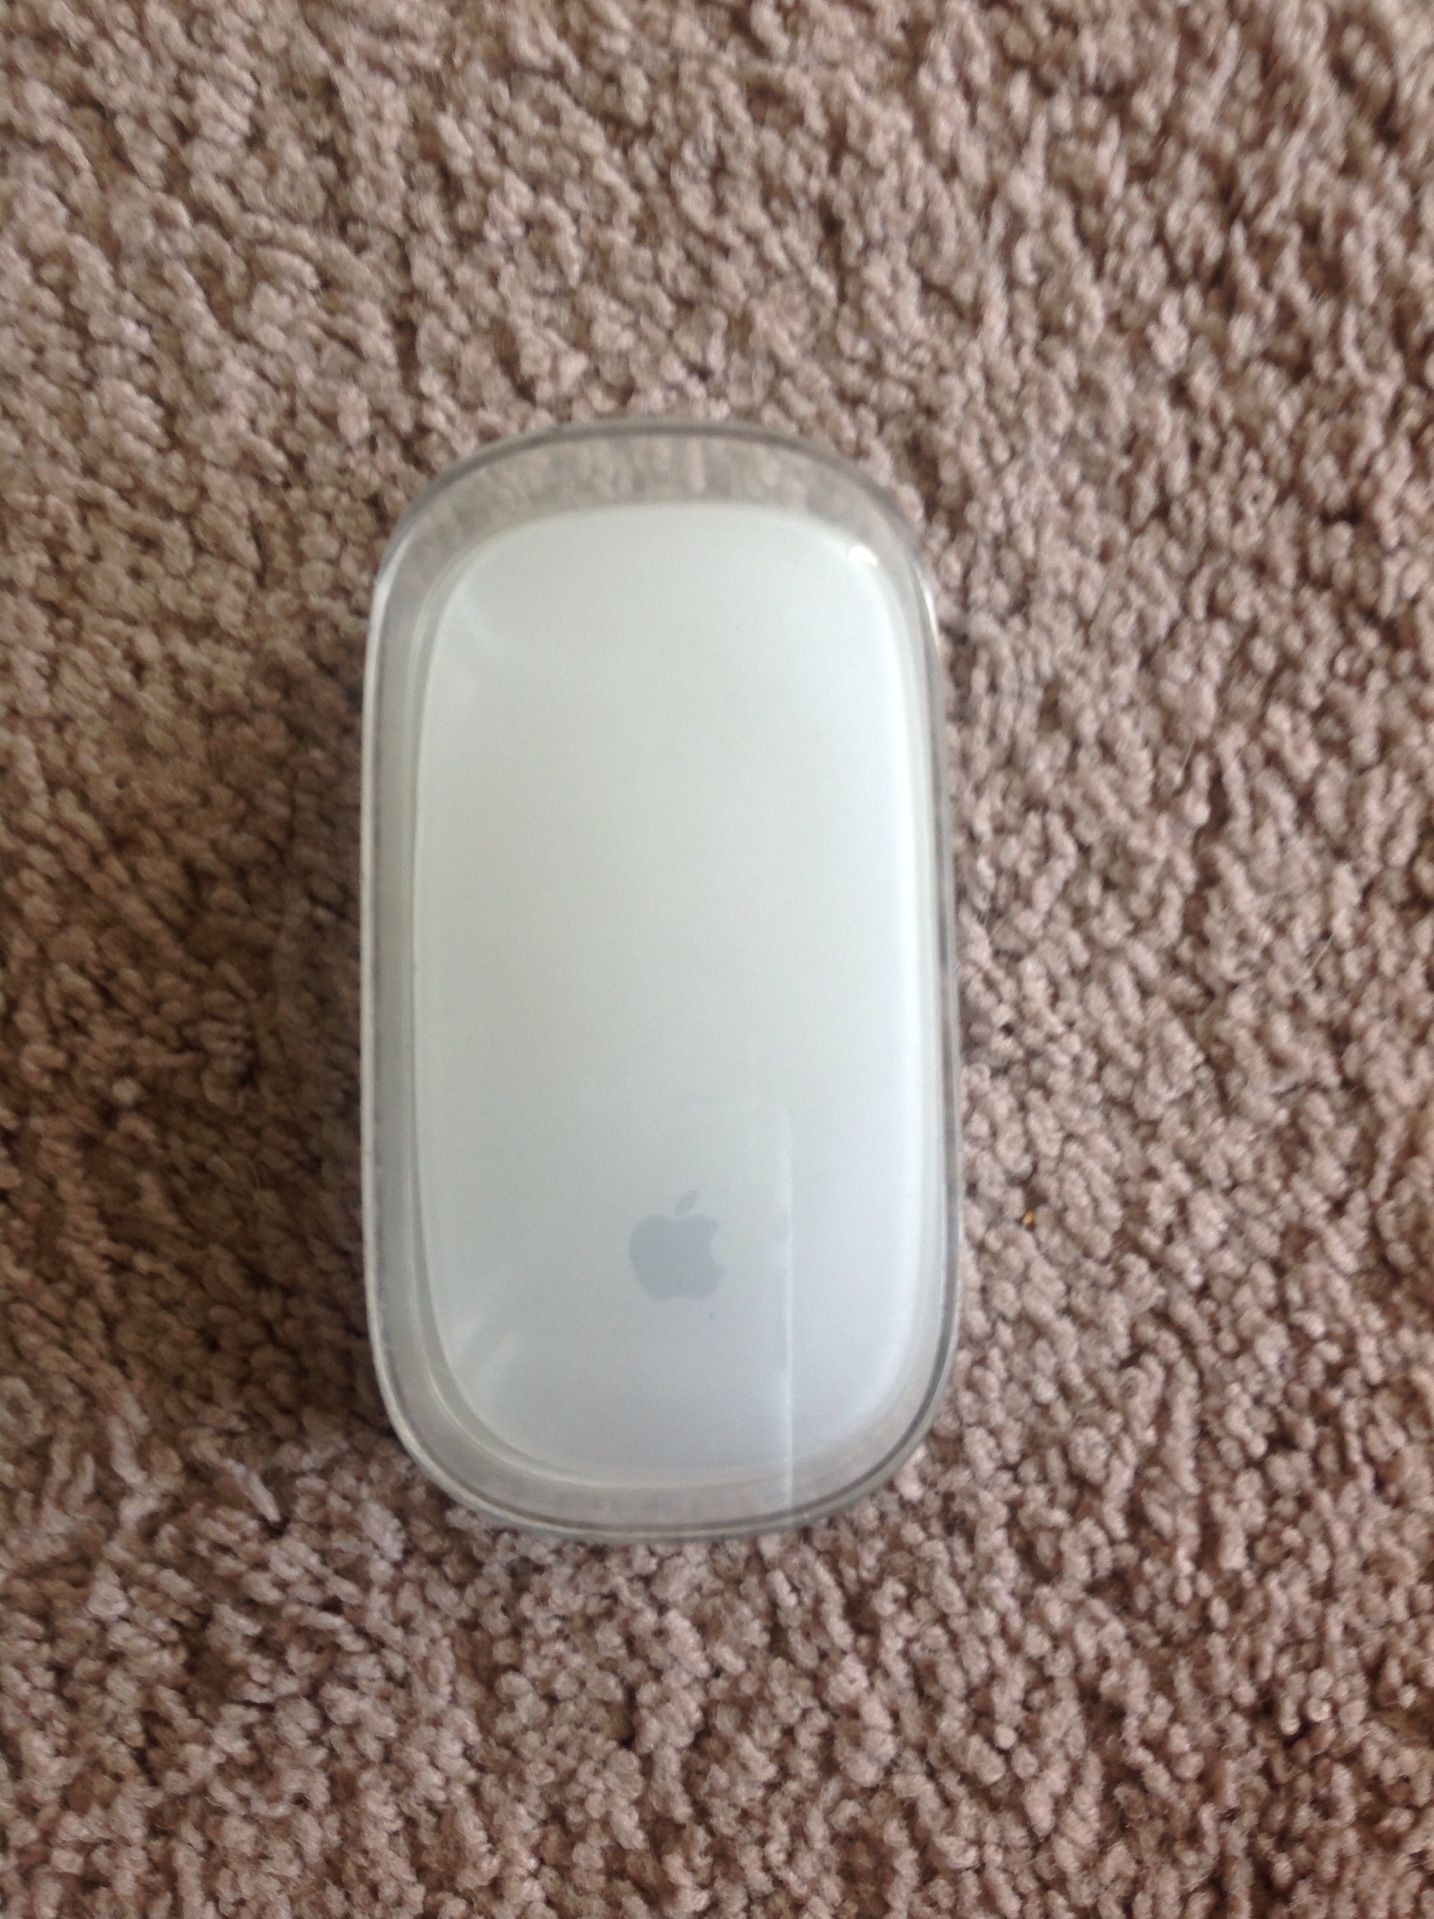 Apple wireless Magic Mouse for MacBook